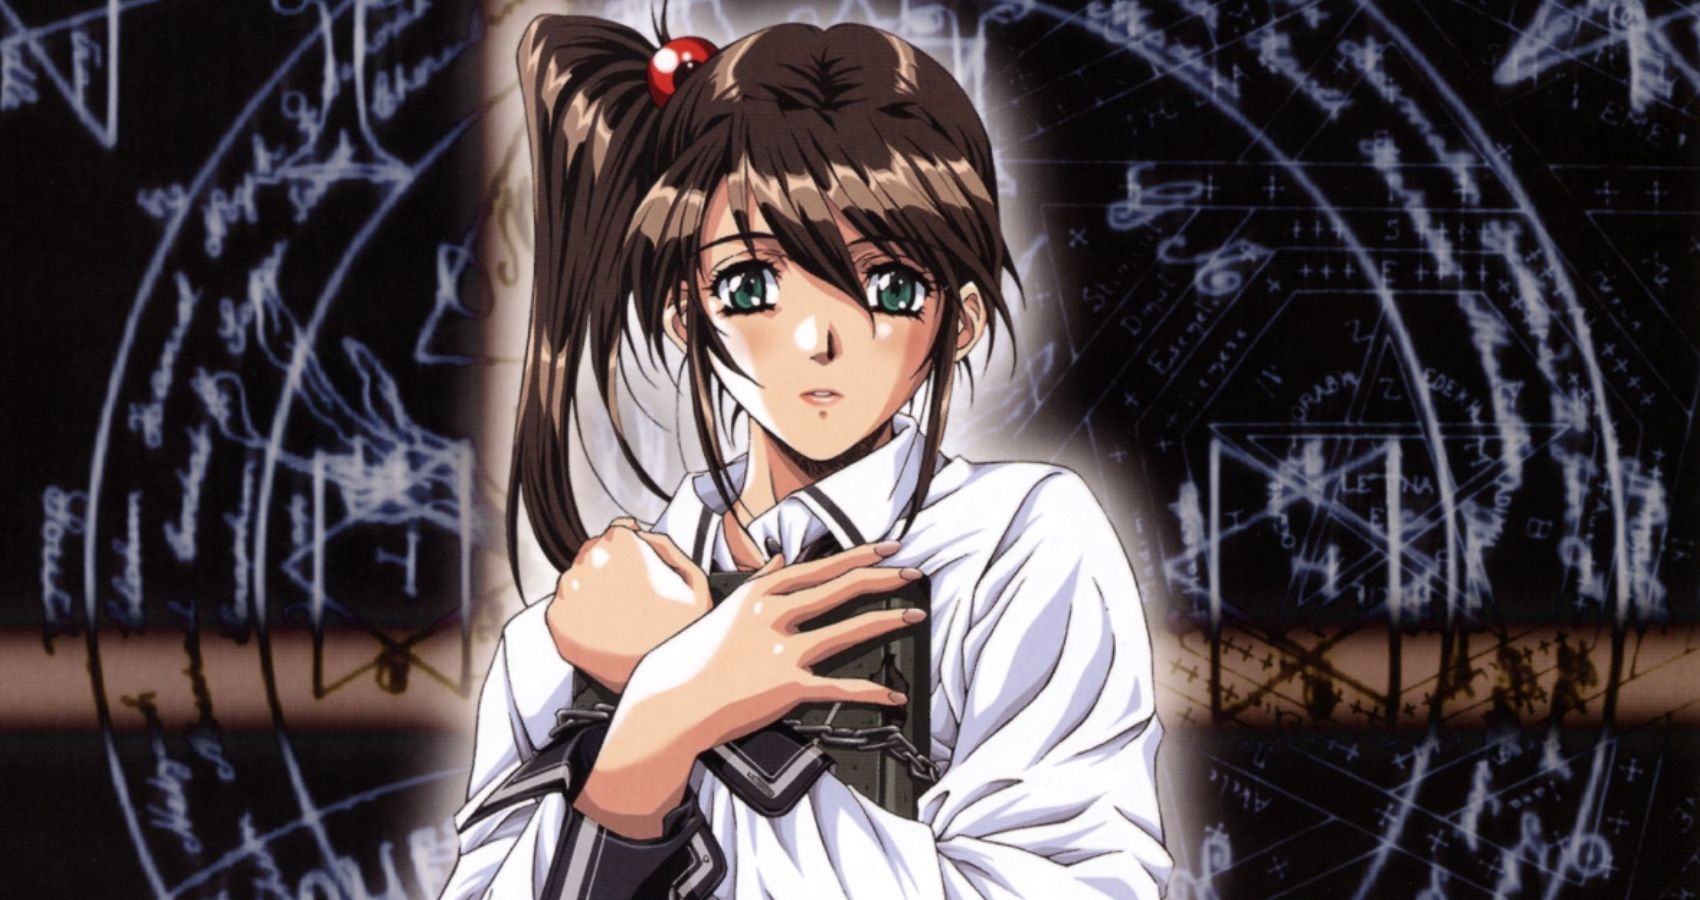 Bible Black Kitami Sex Game - 20 Years Later, Bible Black Is Still A Wicked Horror Romp